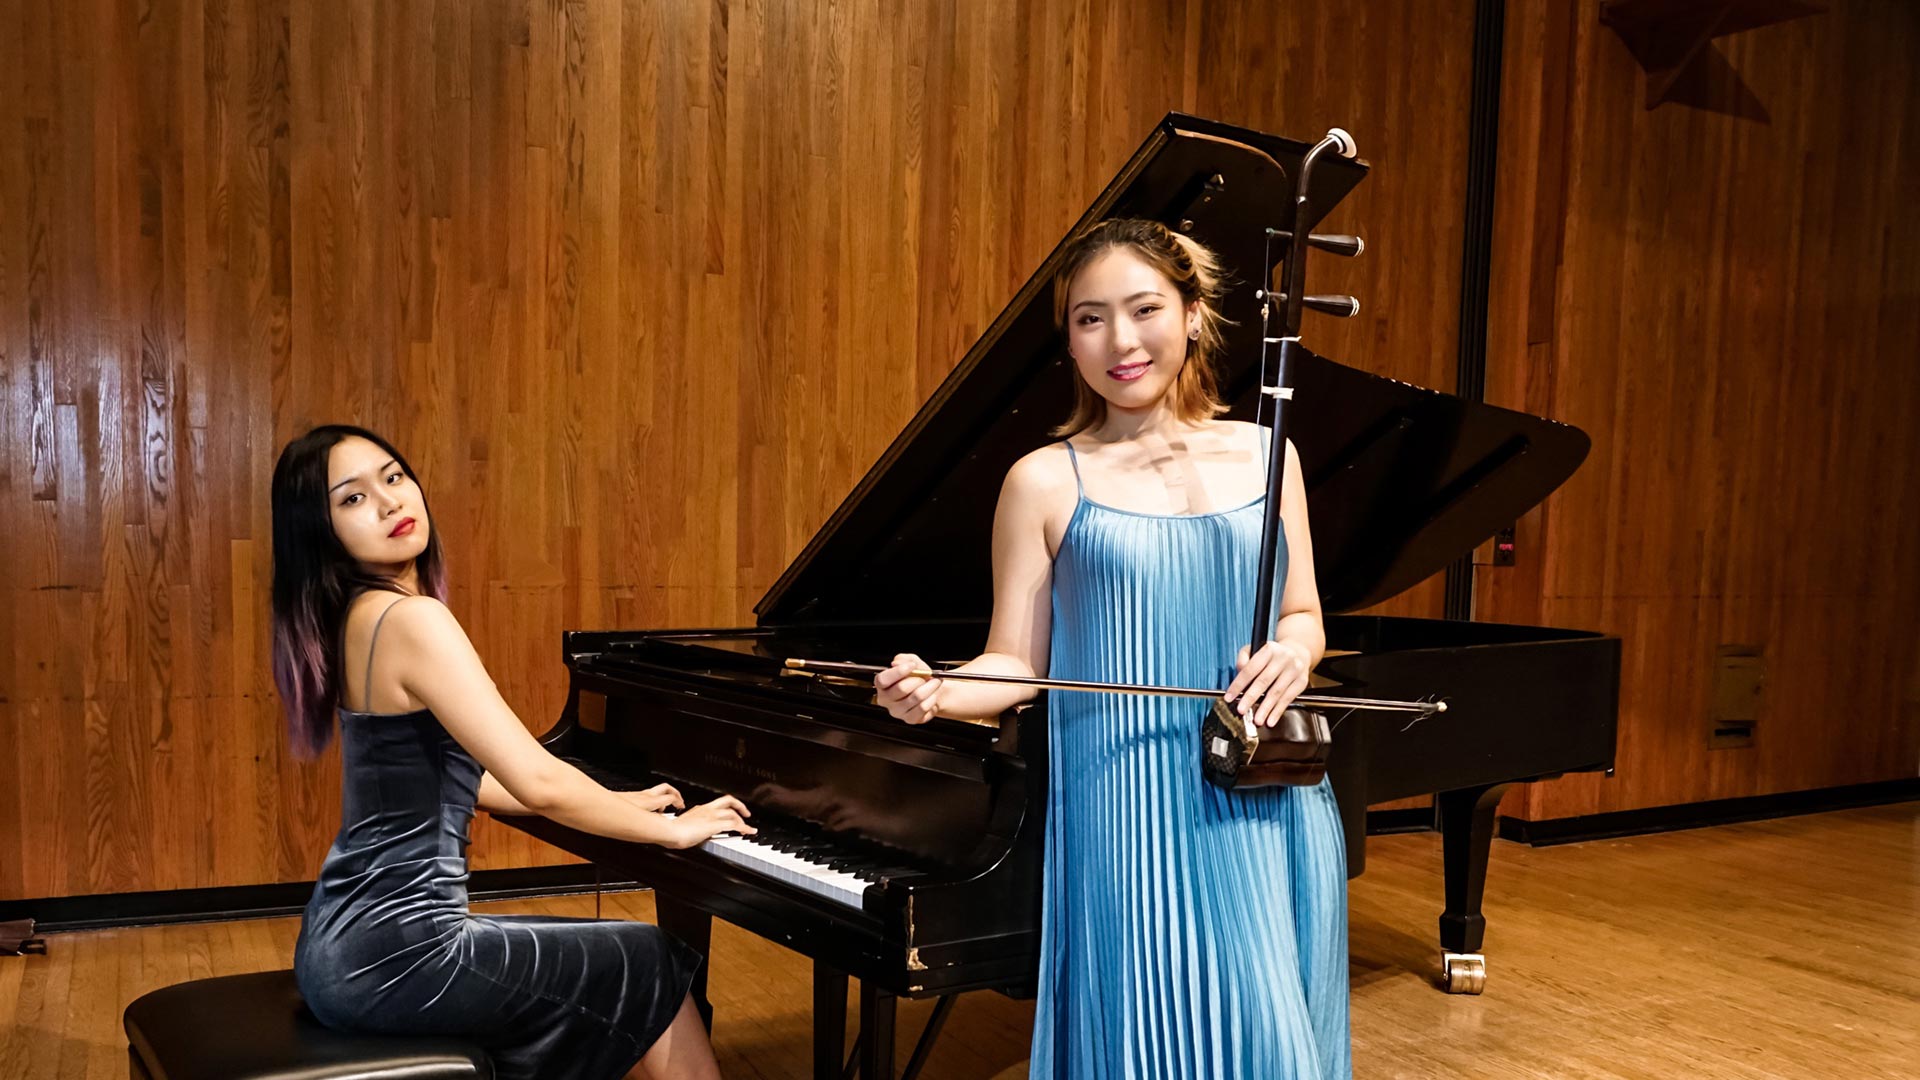 Two women of Asian descent dressed formally on a stage with wooden walls, one at a grand piano, and one holding an erhu